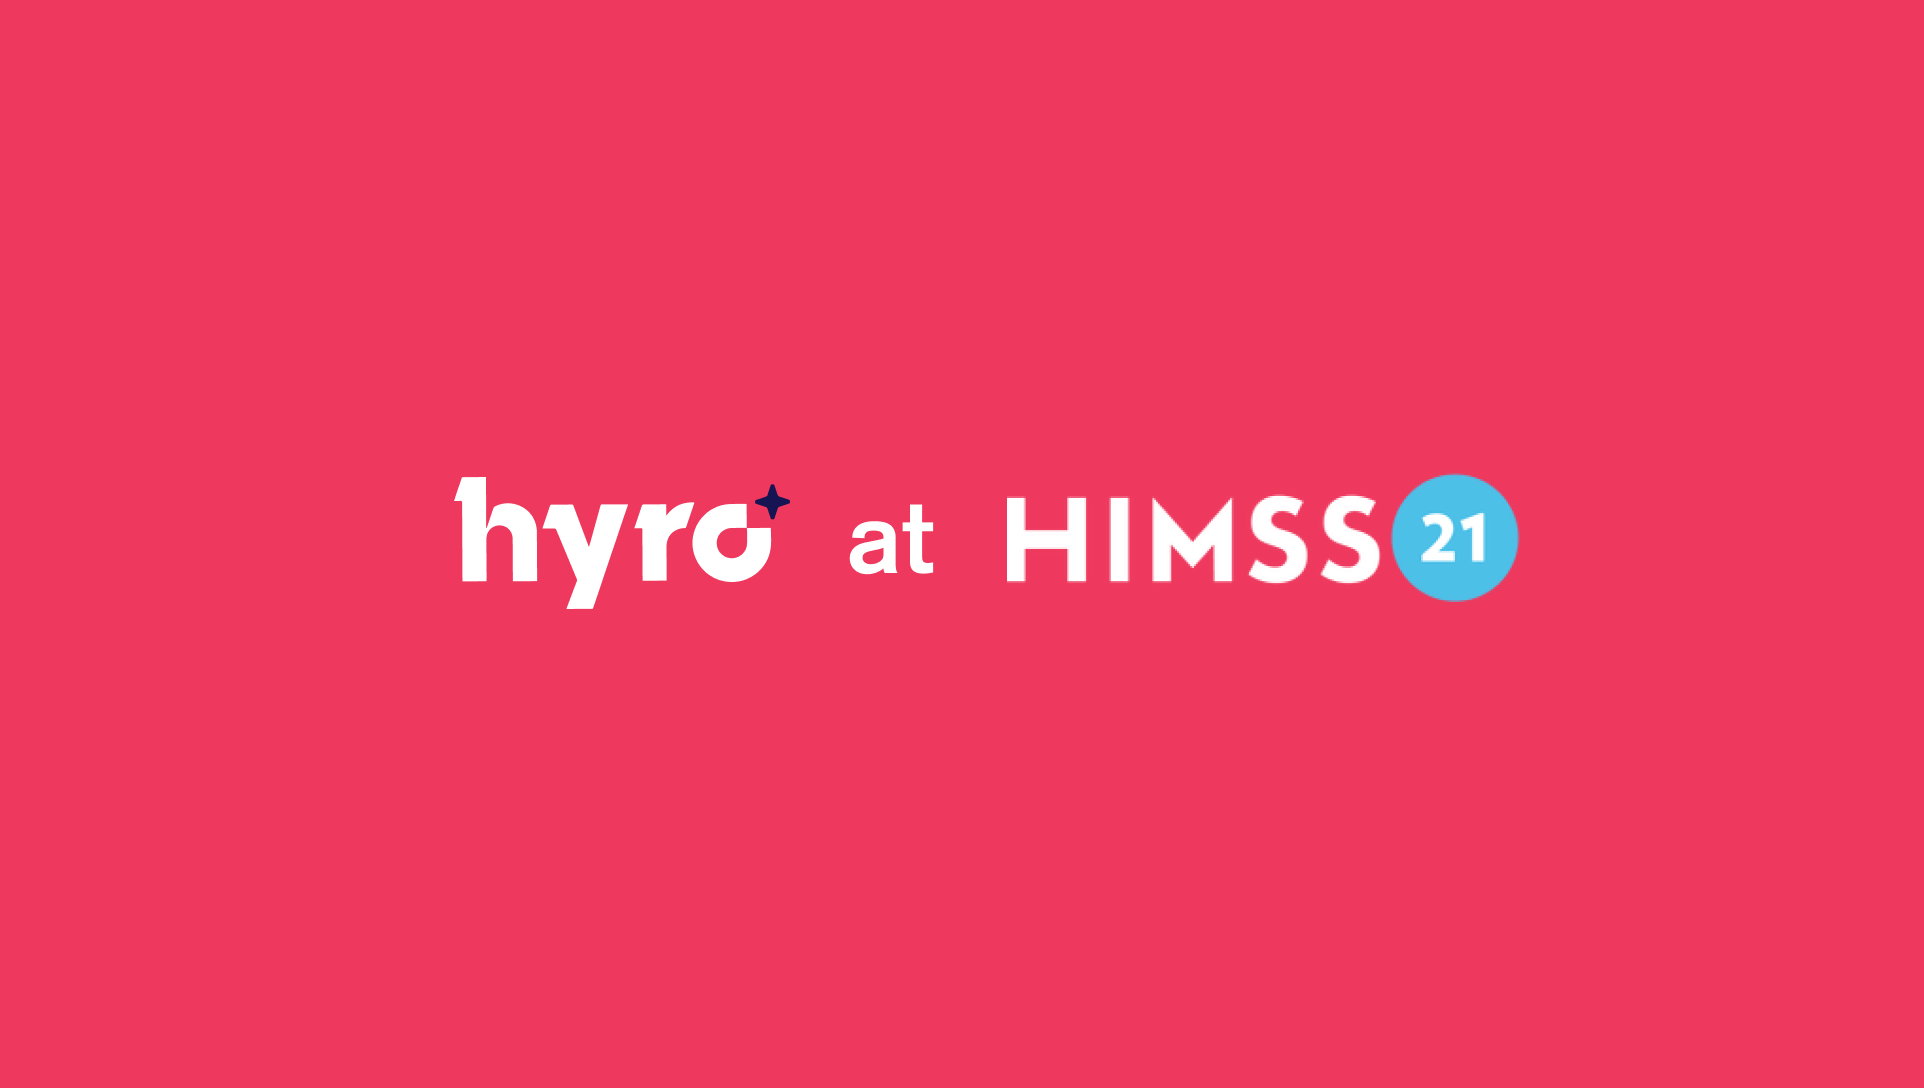 Top Eight Sessions to Look Out for at HIMSS21